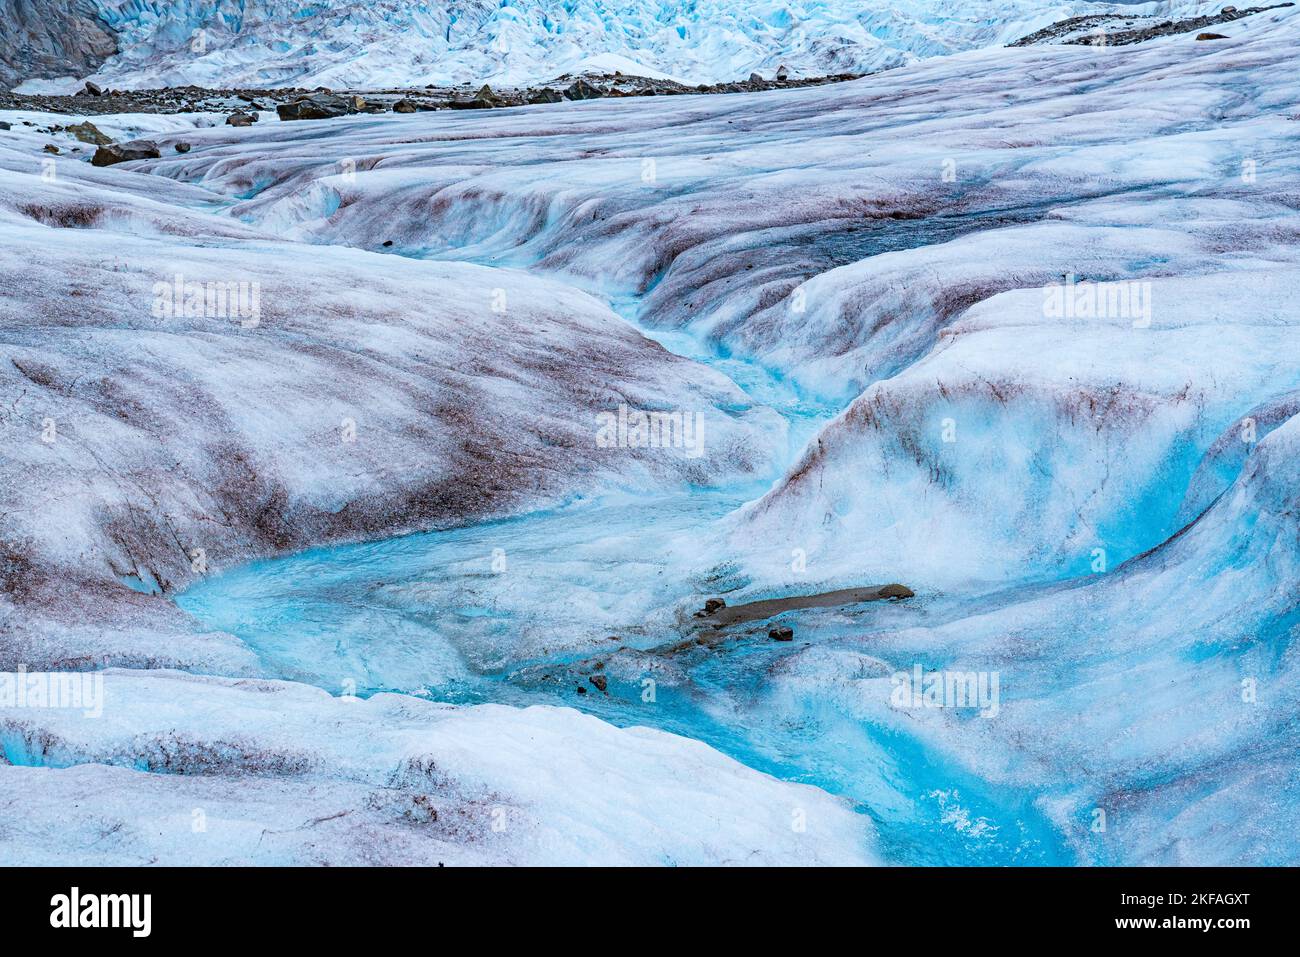 Melting glacier ice in the Mendenhall Glacier in Alaska forms a winding stream of crystal clear blue water Stock Photo